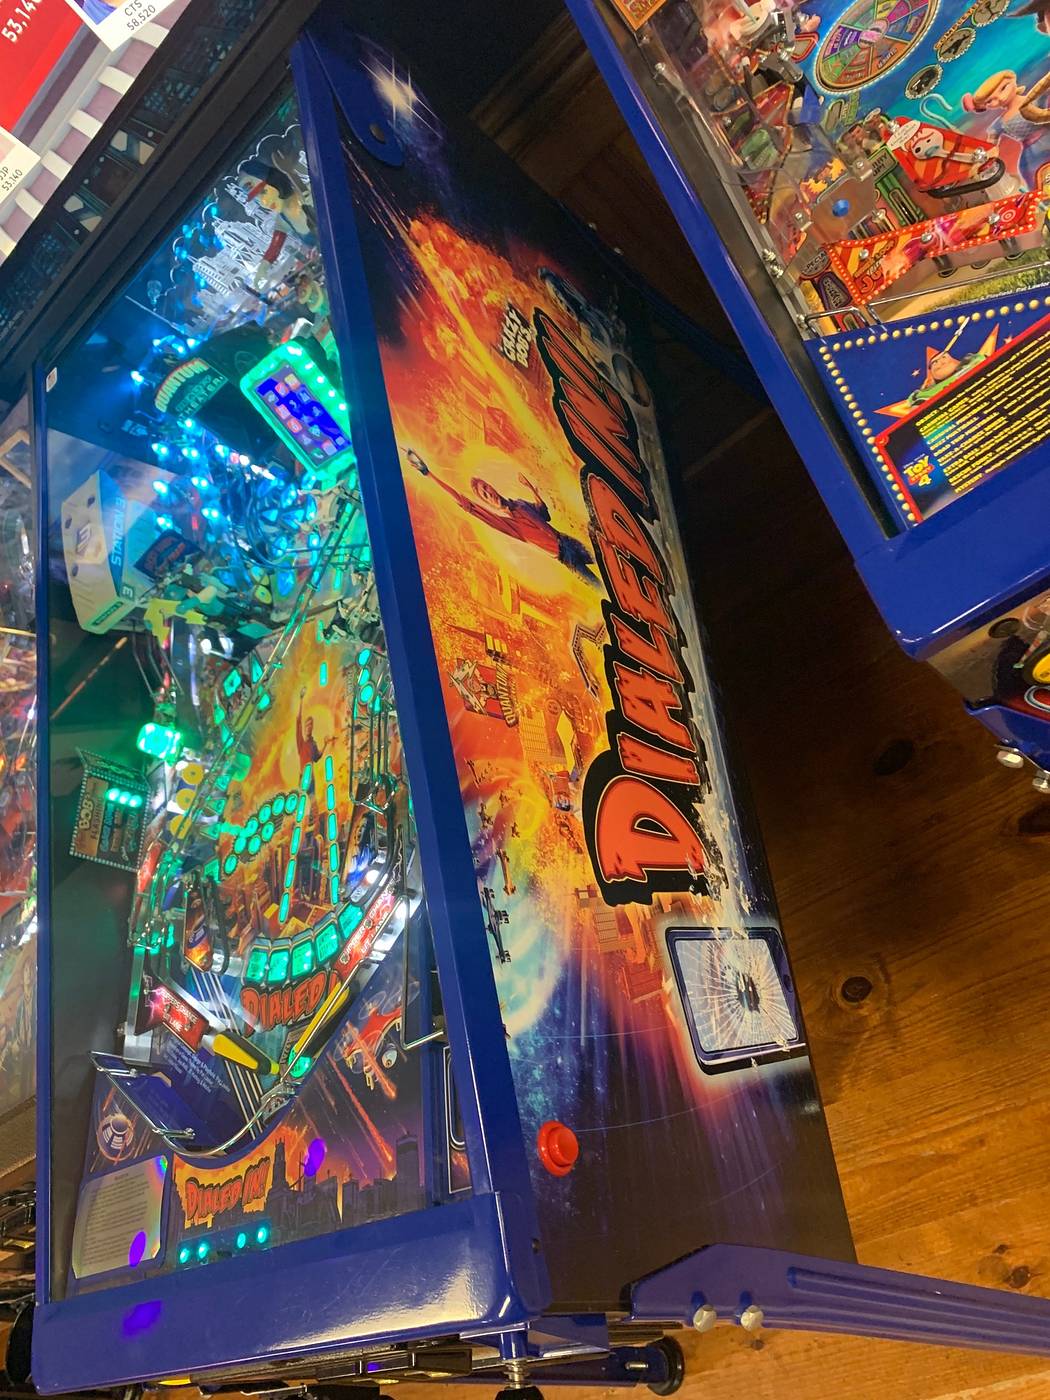 Dialed In Limited Edition Pinball Machine by Jersey Jack